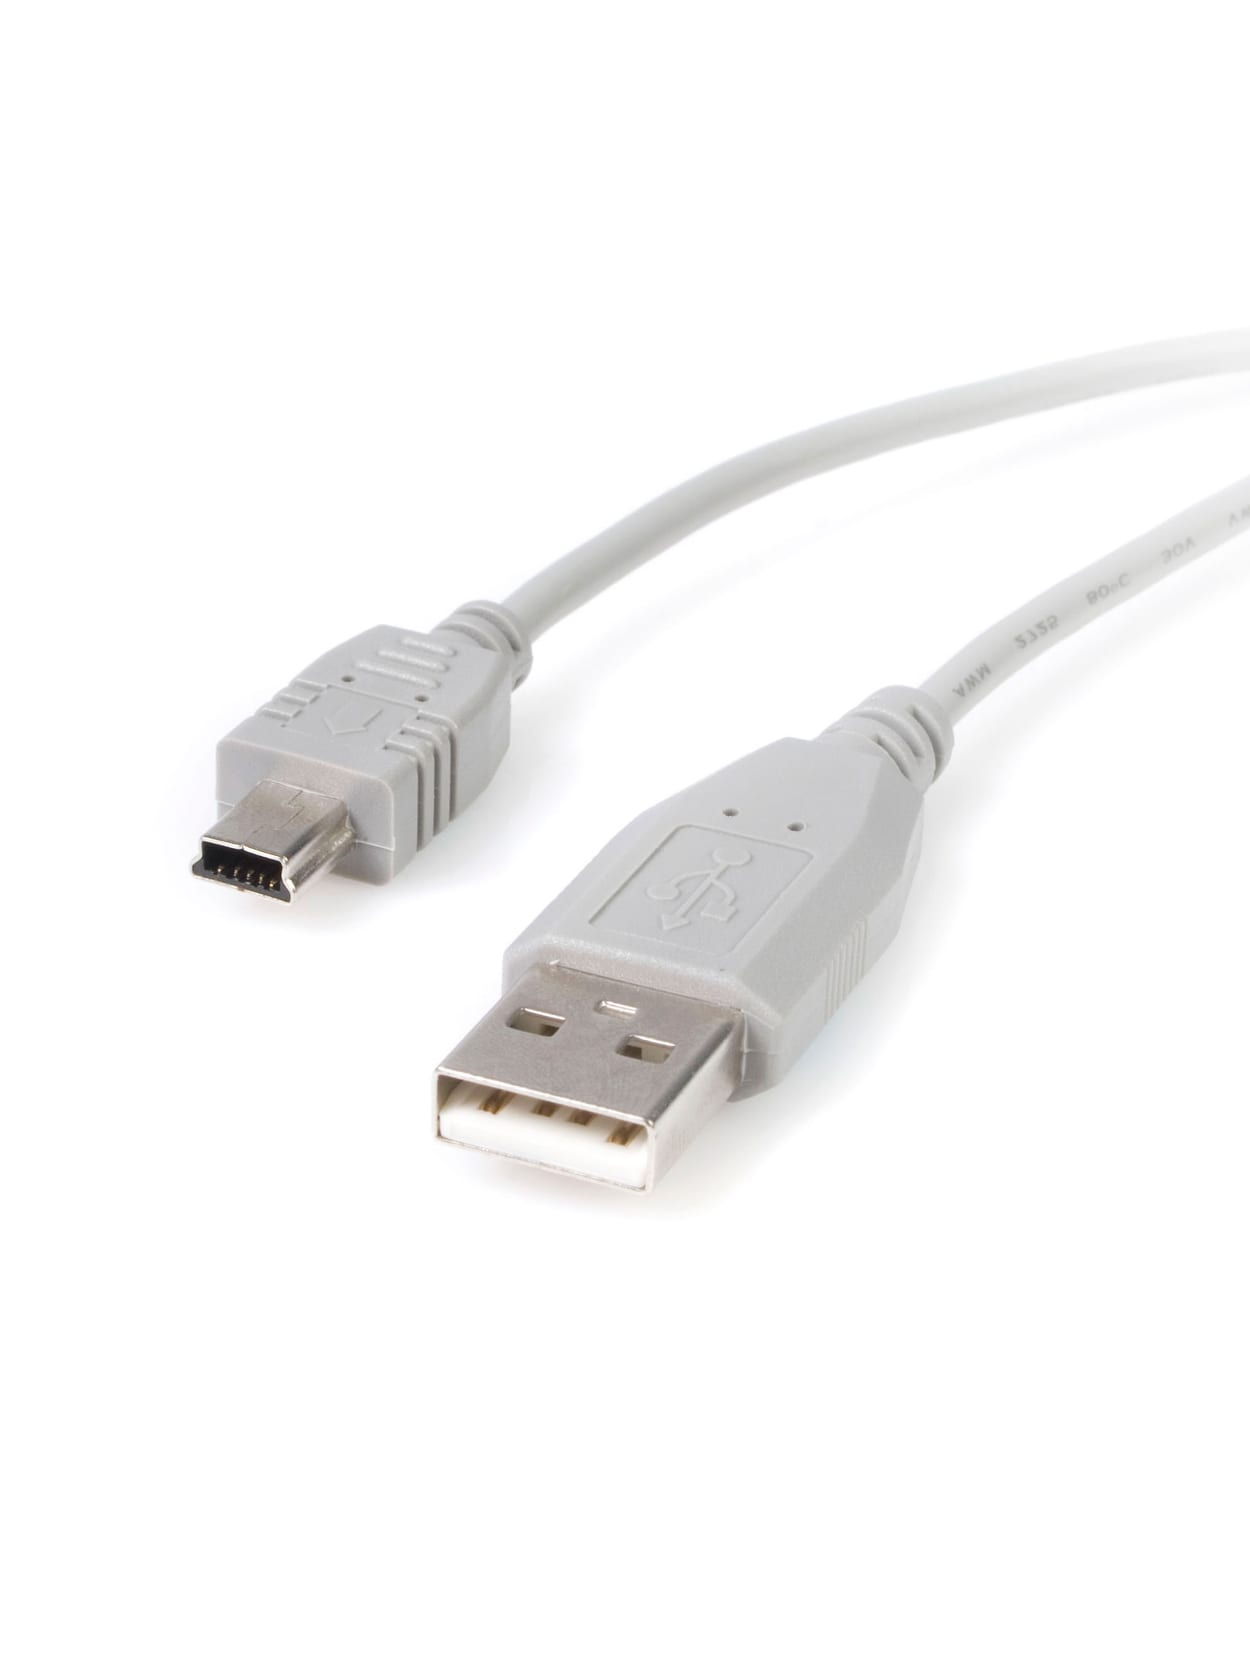 a to b type usb cable